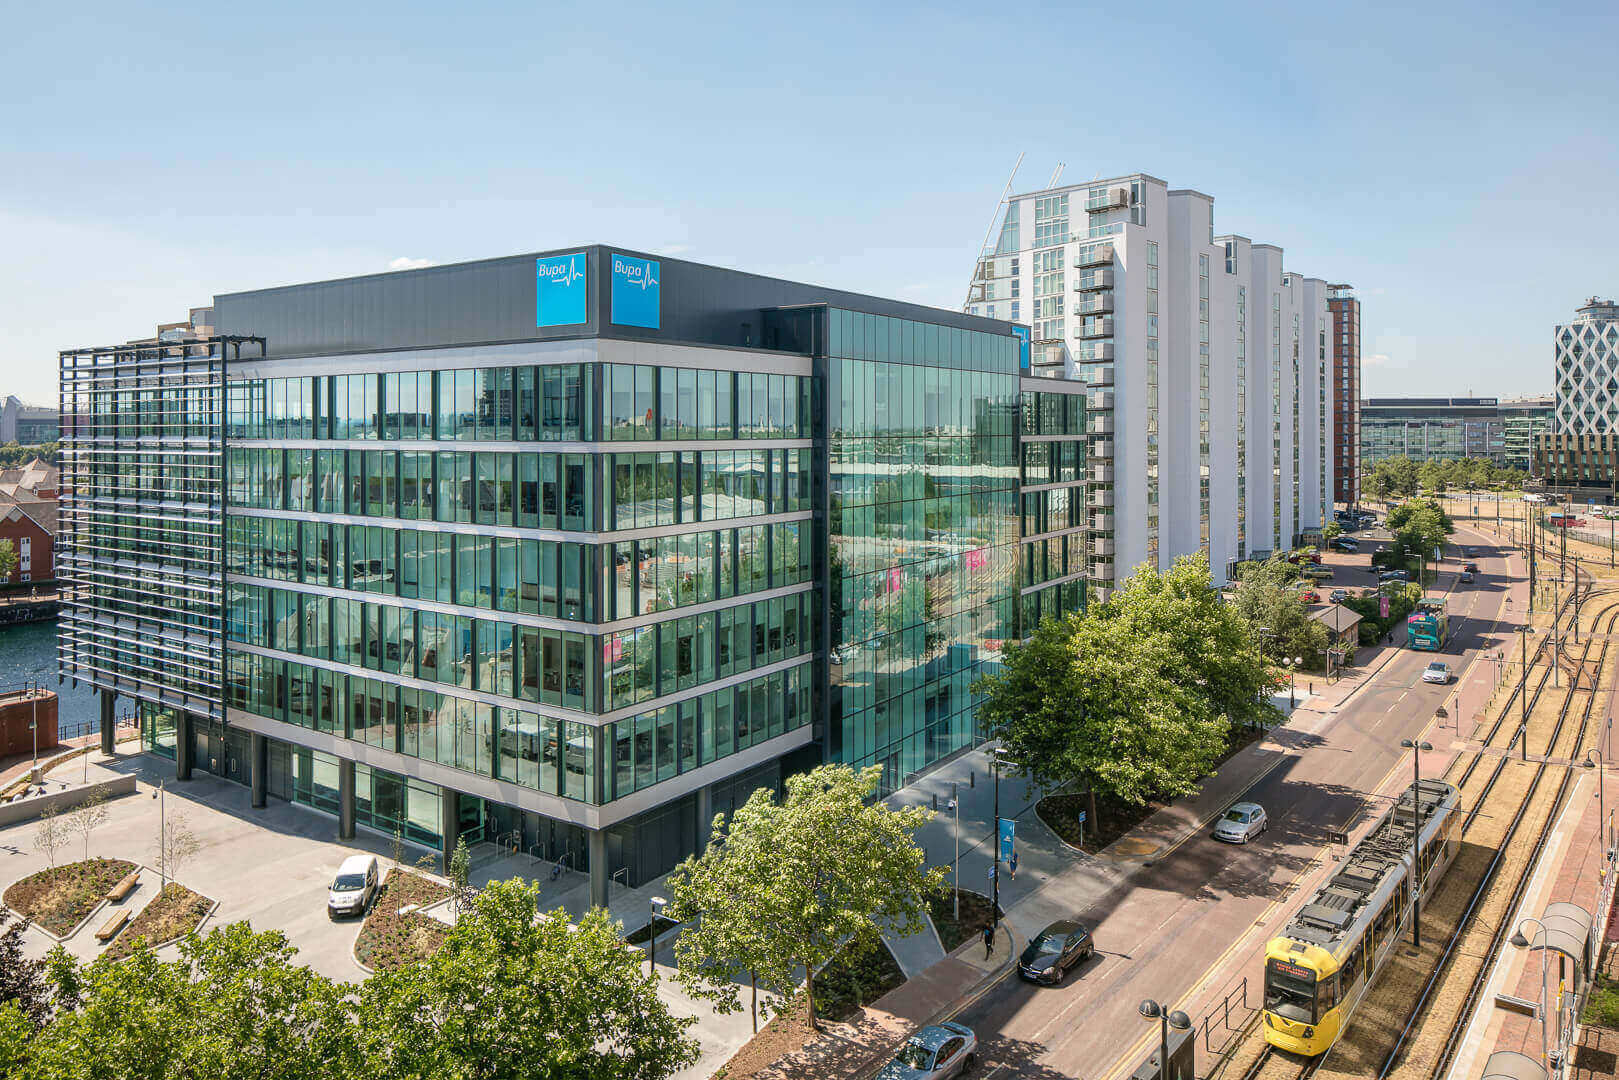 Commercial Architecture, Interiors & Aerial Photography - Bupa Place, MediaCityUK